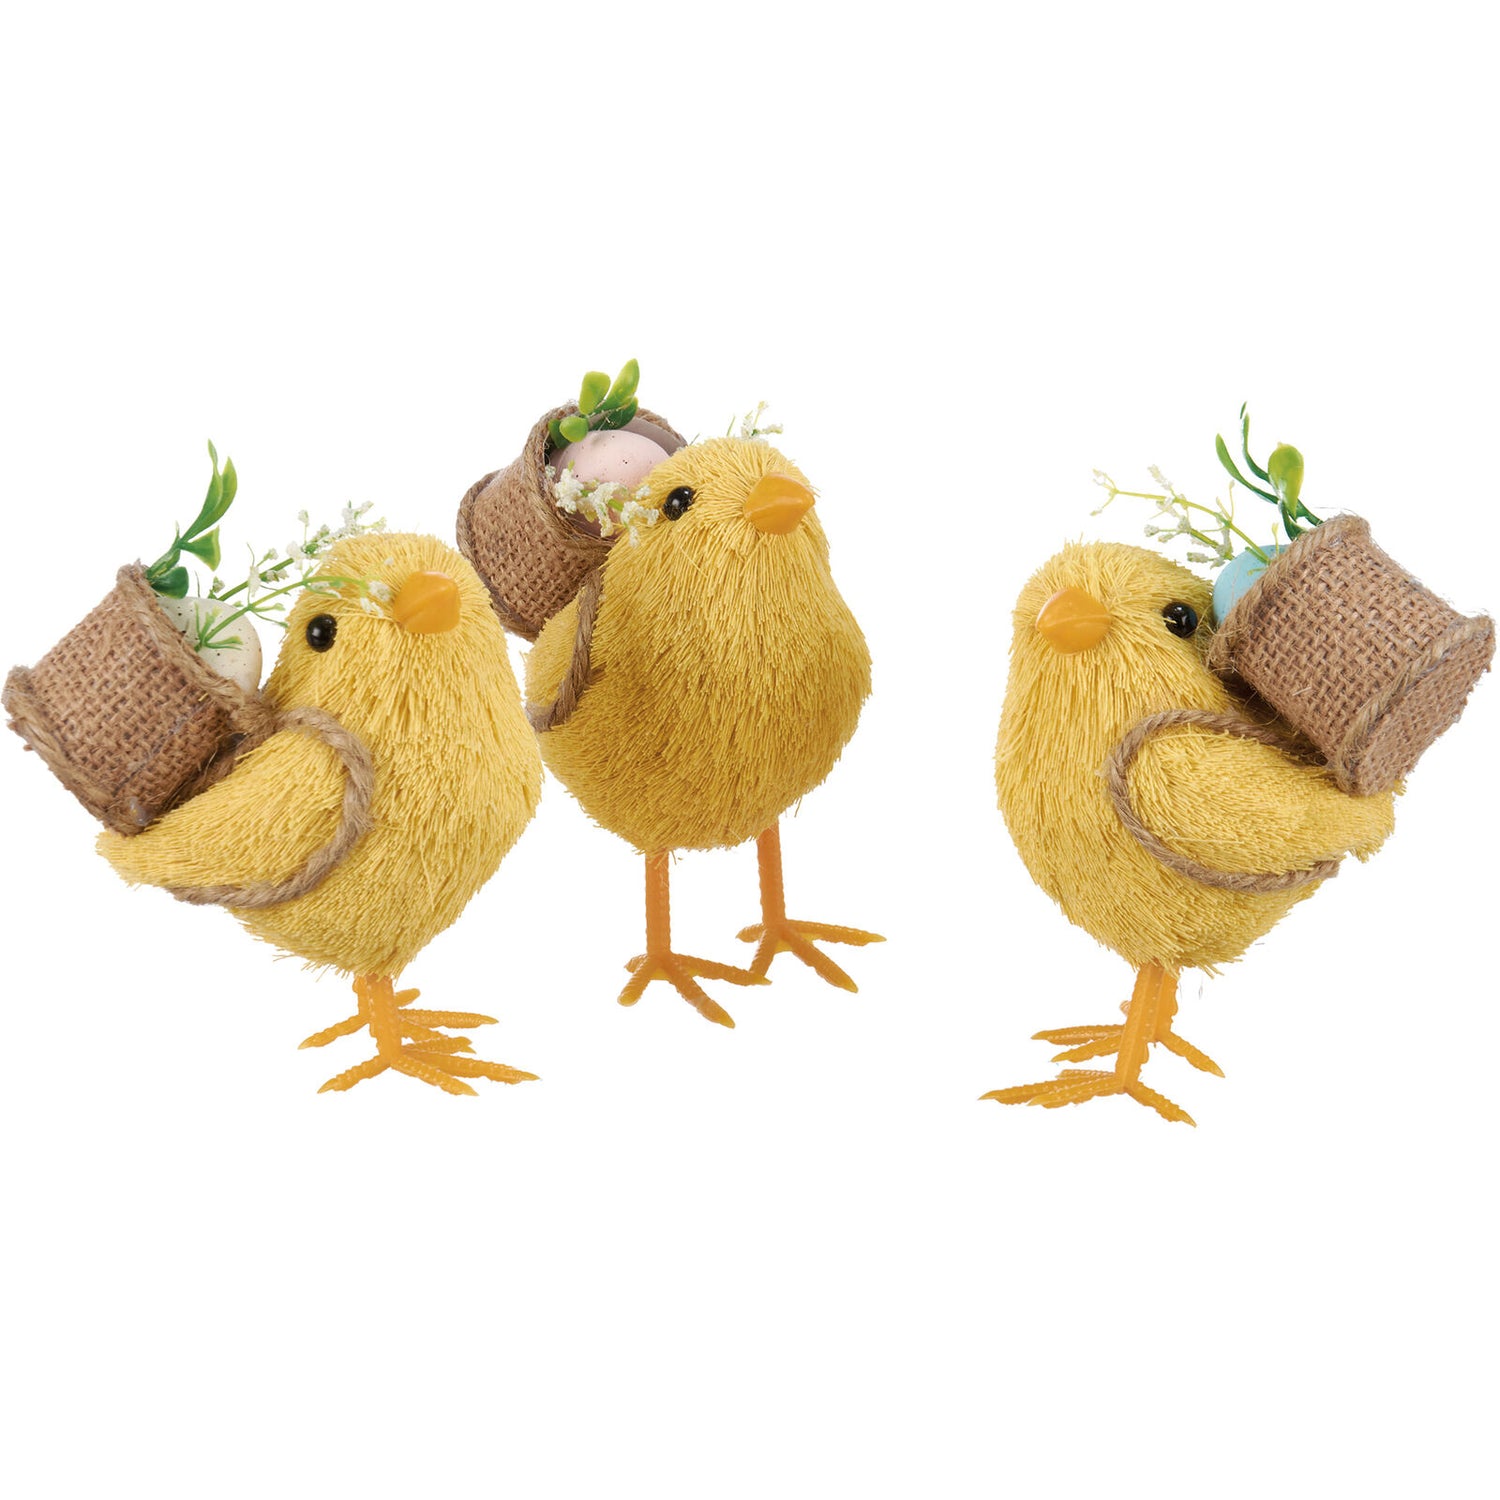 Easter Spring 3 pc Farmhouse Chicks w/ Easter Egg Baskets - The Primitive Pineapple Collection